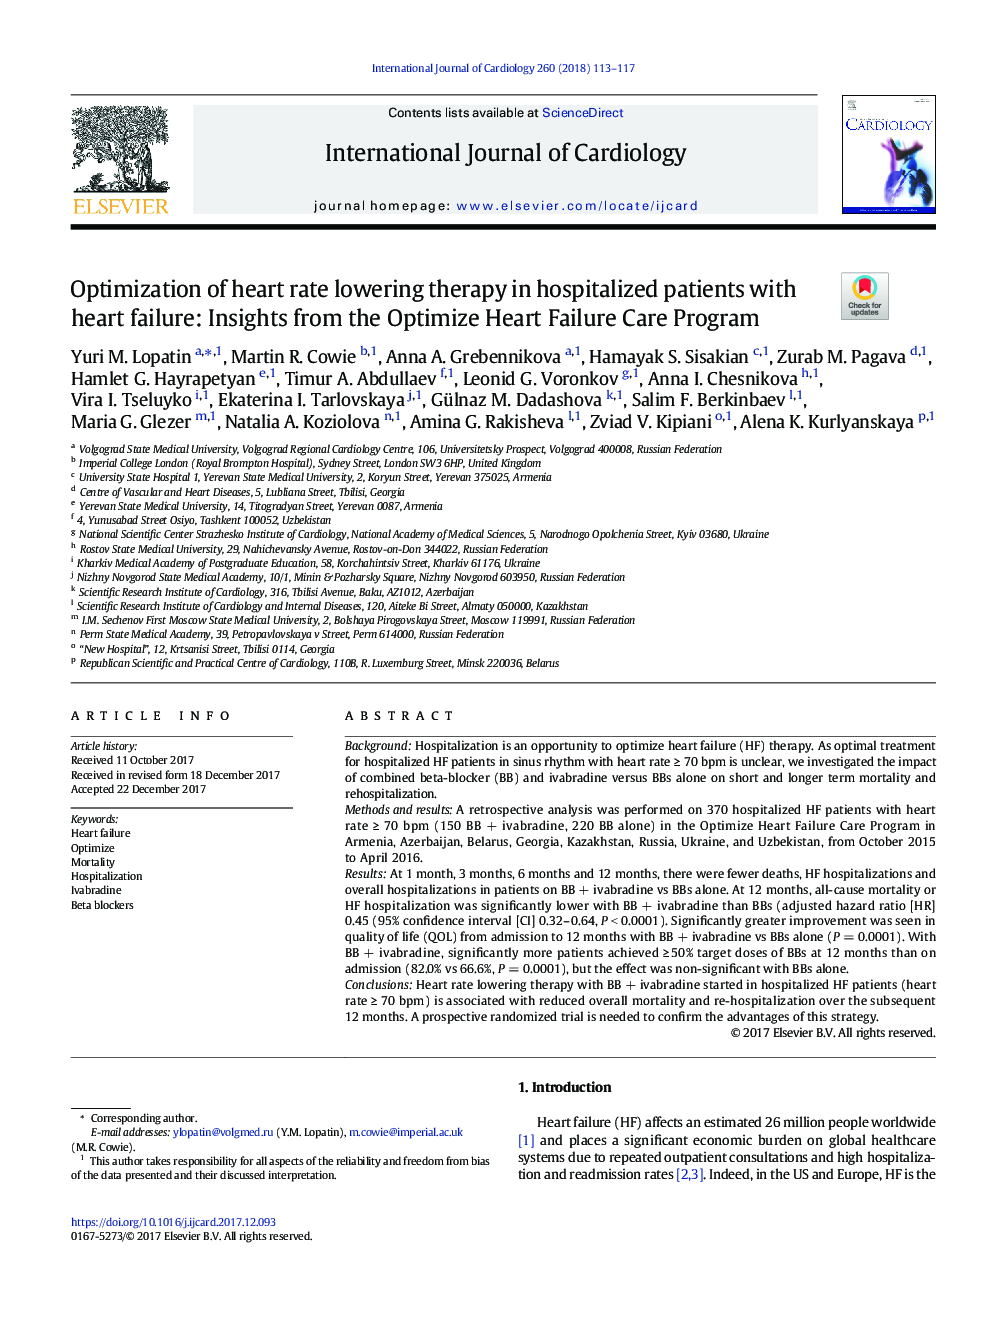 Optimization of heart rate lowering therapy in hospitalized patients with heart failure: Insights from the Optimize Heart Failure Care Program